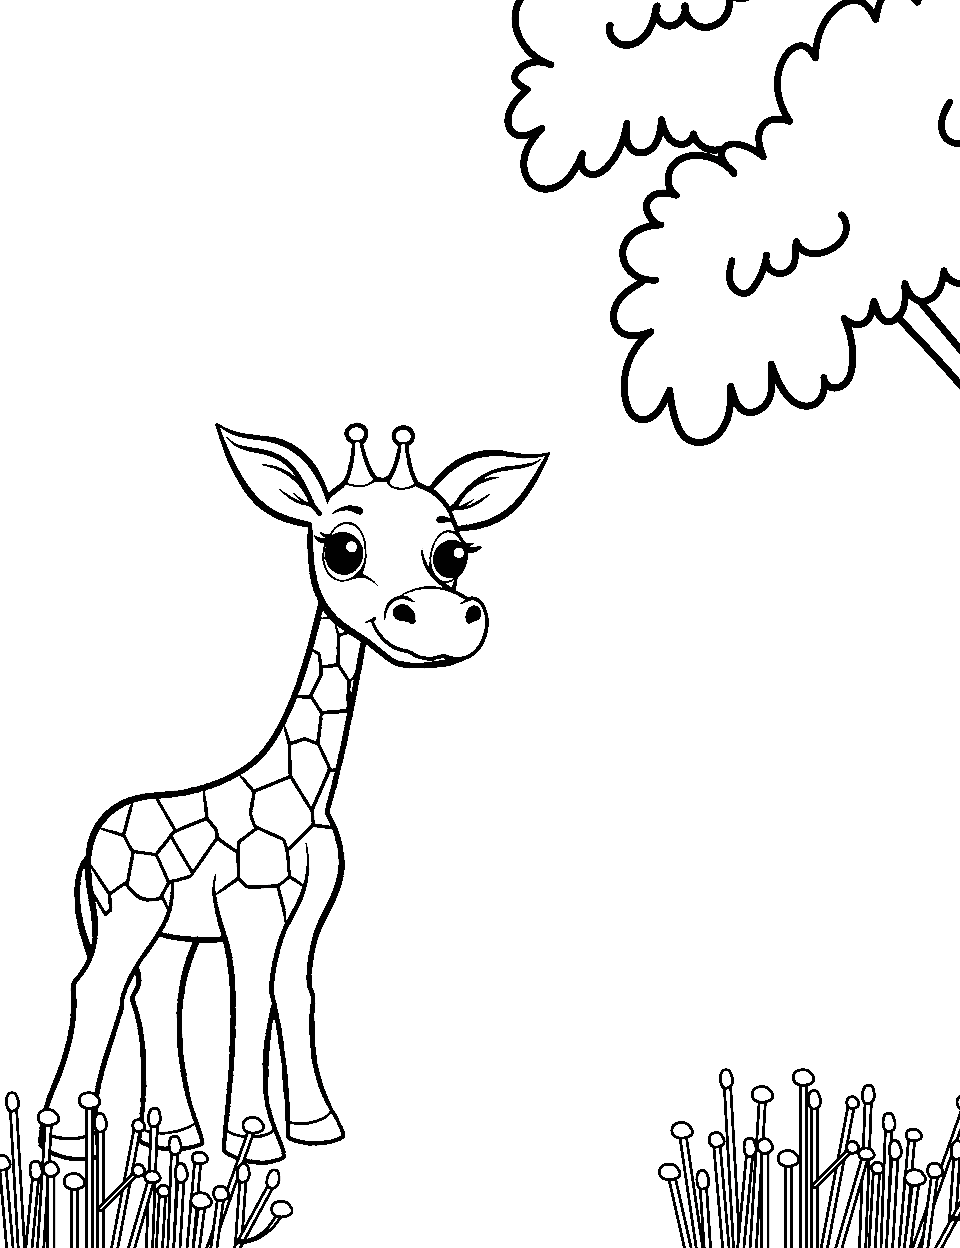 Little Giraffe Adventure Coloring Page - A smaller giraffe out for an adventure strolling around.